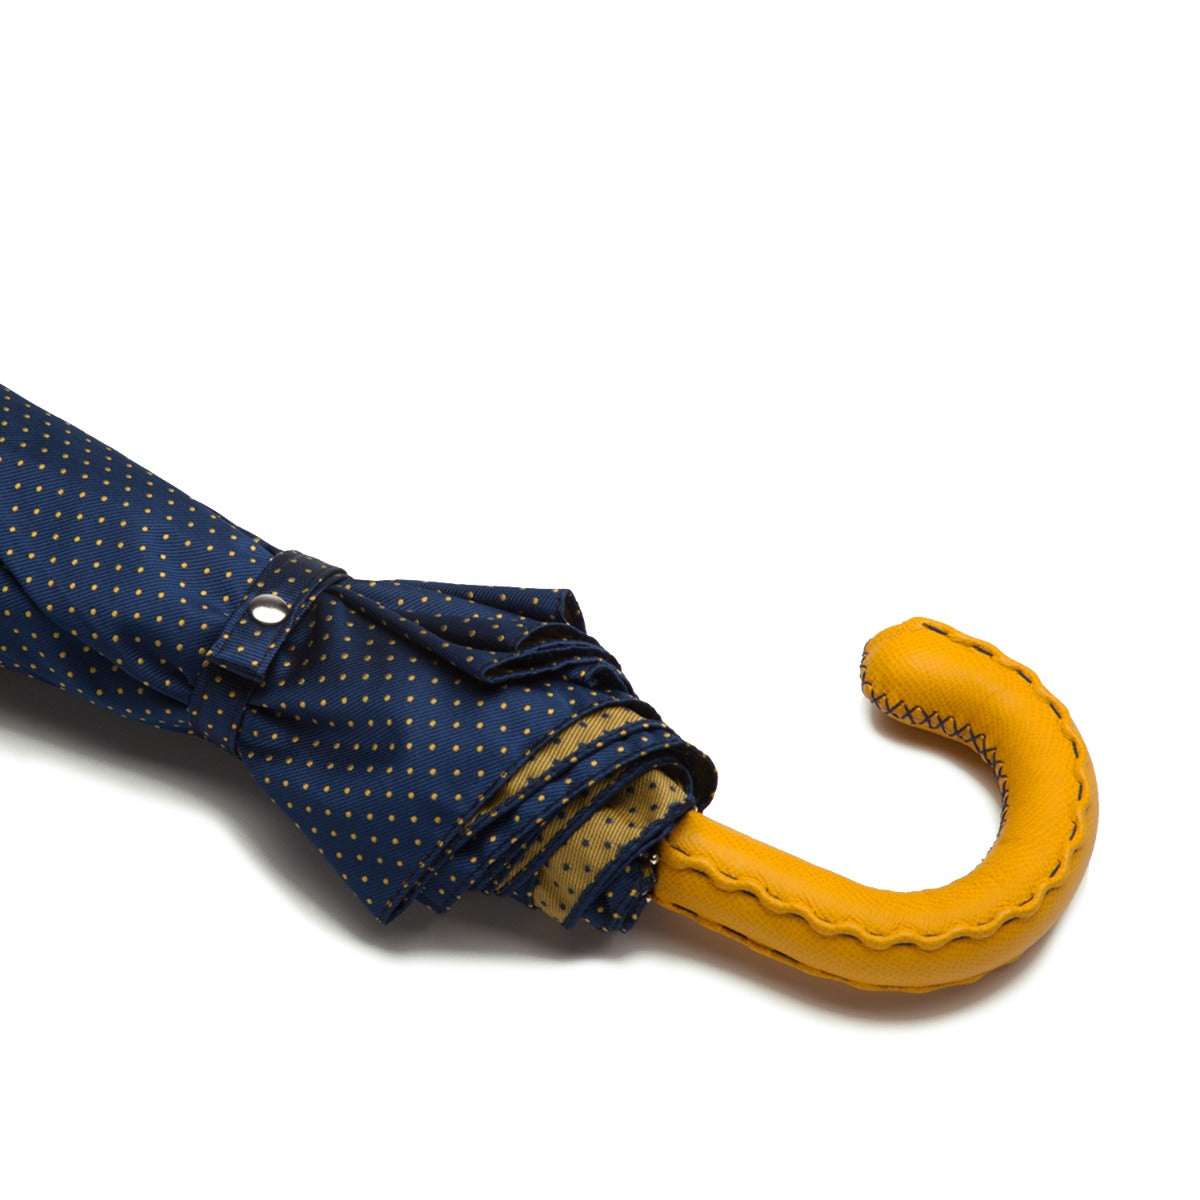 A Navy Yellow-Dot Travel umbrella with a yellow leather handle from KirbyAllison.com.